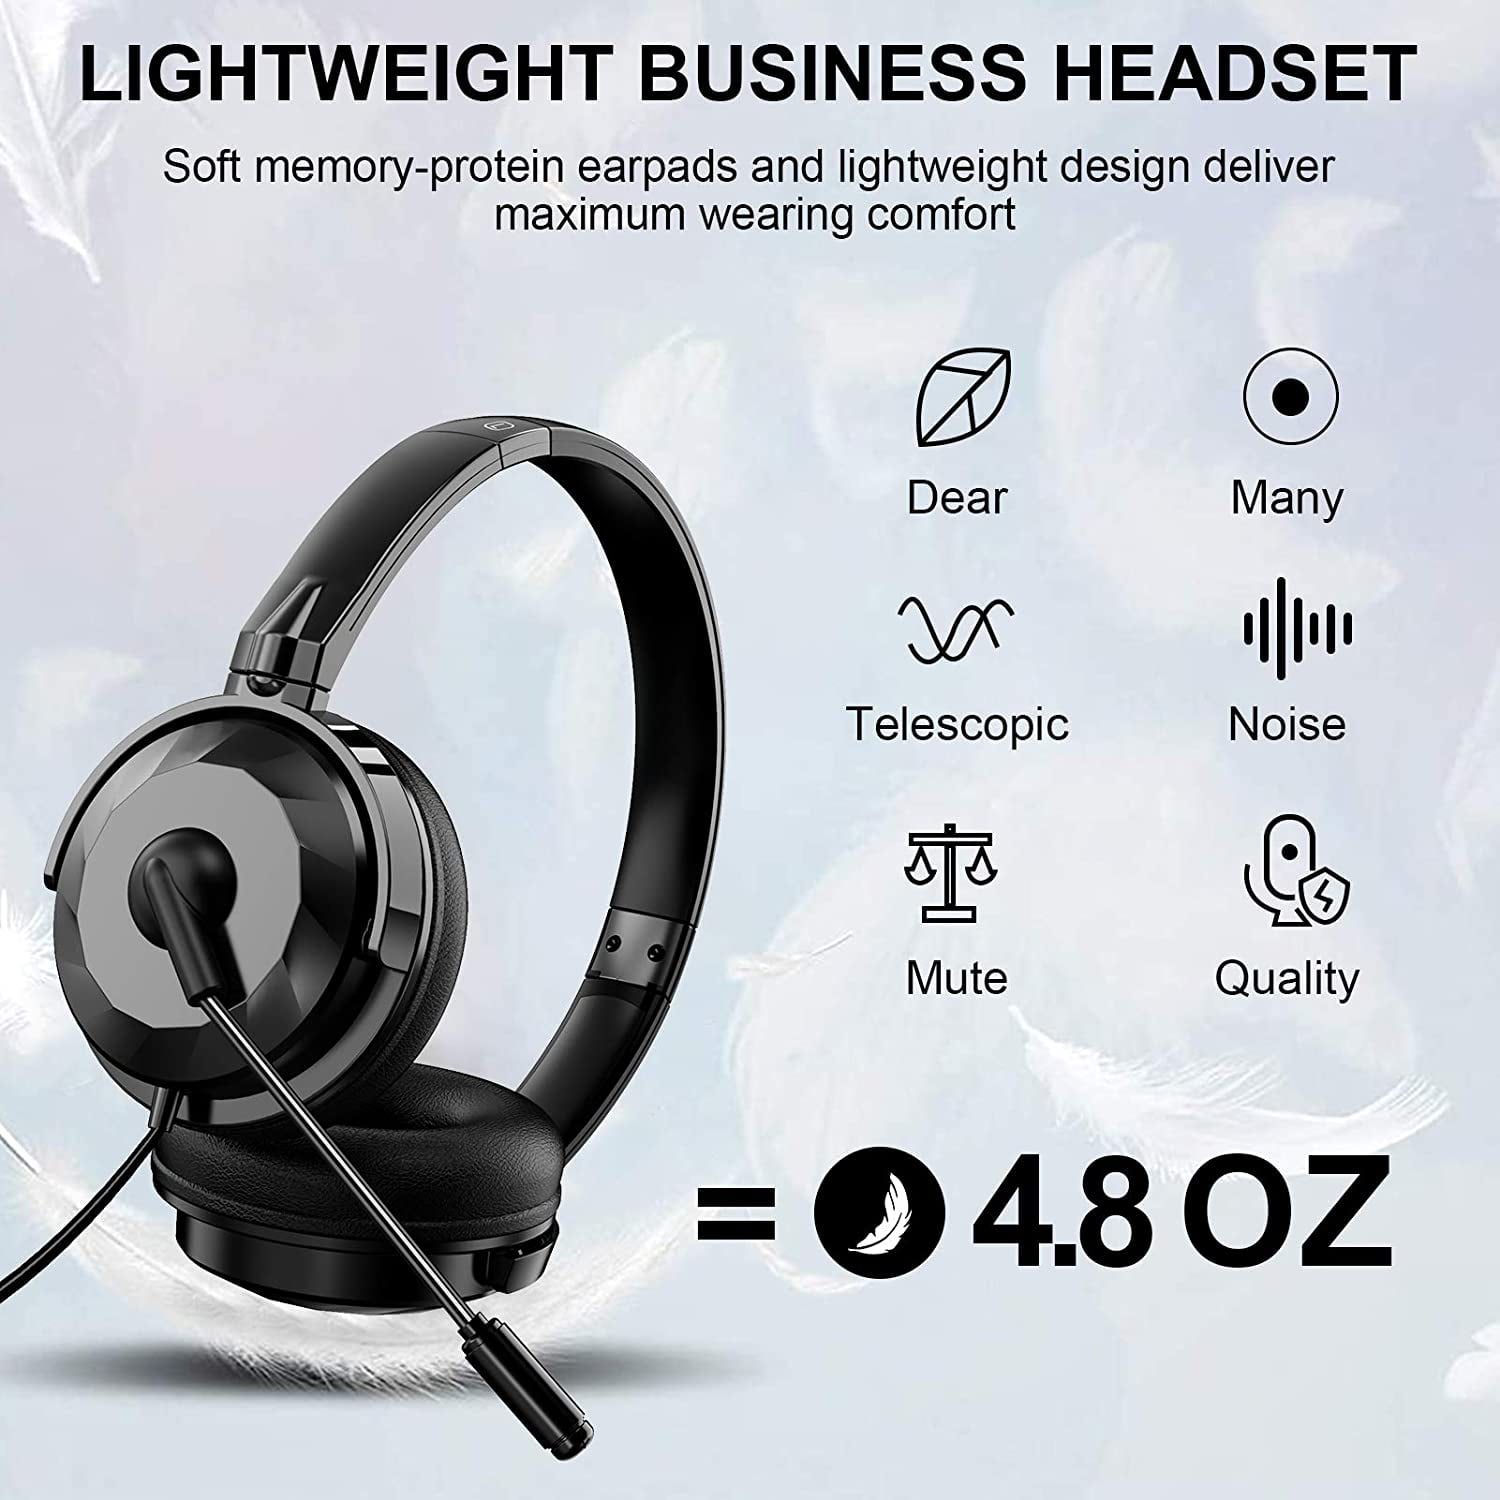 Cell Phone Stereo Lightweight PC Headset Wired Headphones Webinar Business Headset for PCs Skype NPET CH10 USB Headset/ 3.5mm Computer Headset with Microphone Noise Cancelling Tablets